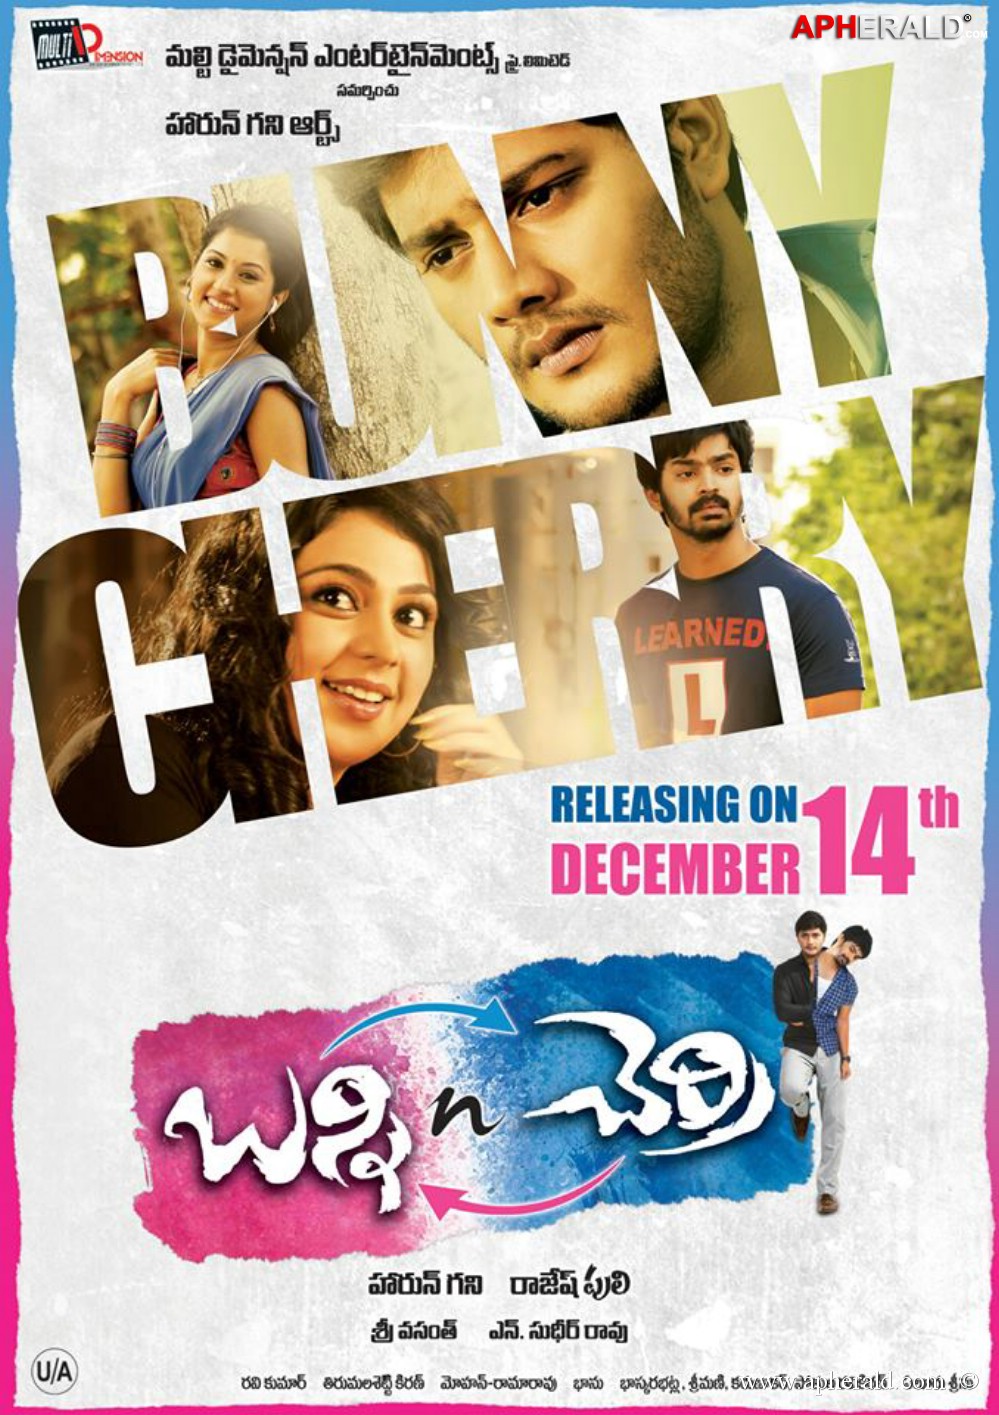 Bunny N Cherry Release date Posters 